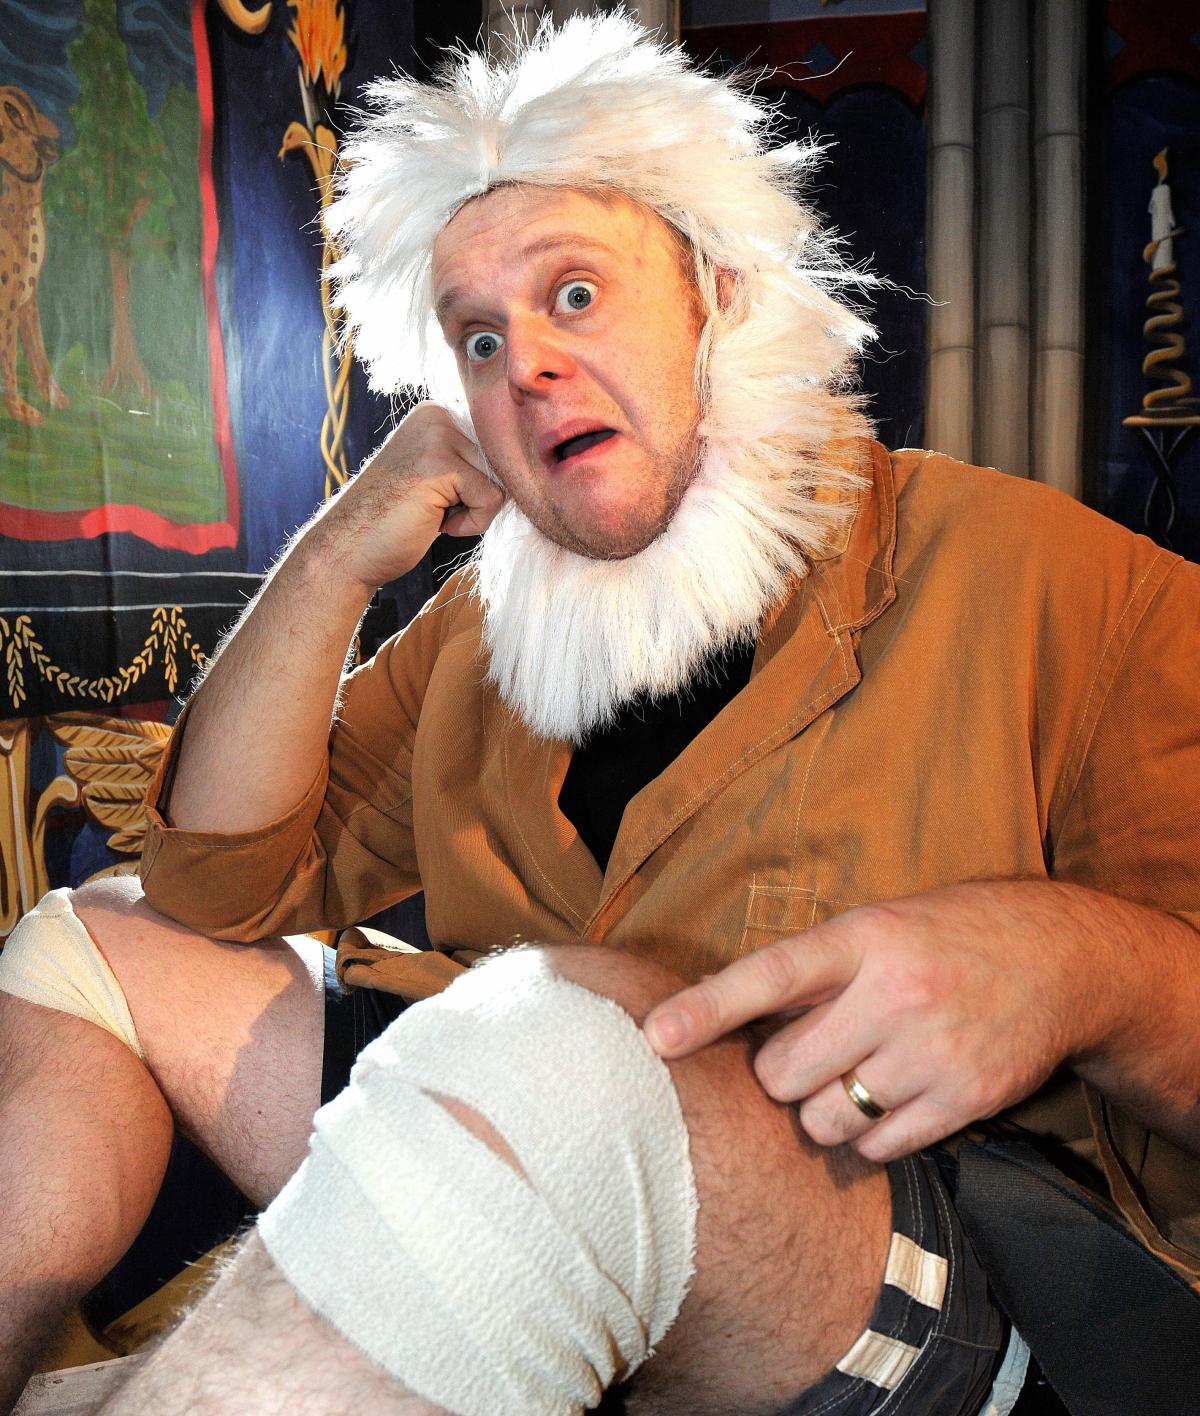 A physiotherapist has had to be brought to the aid of Addingham pantomime'd seven dwarfs. The 'grown-up' actors have found themselves in knee-d of help after hours on their kneees on stage.